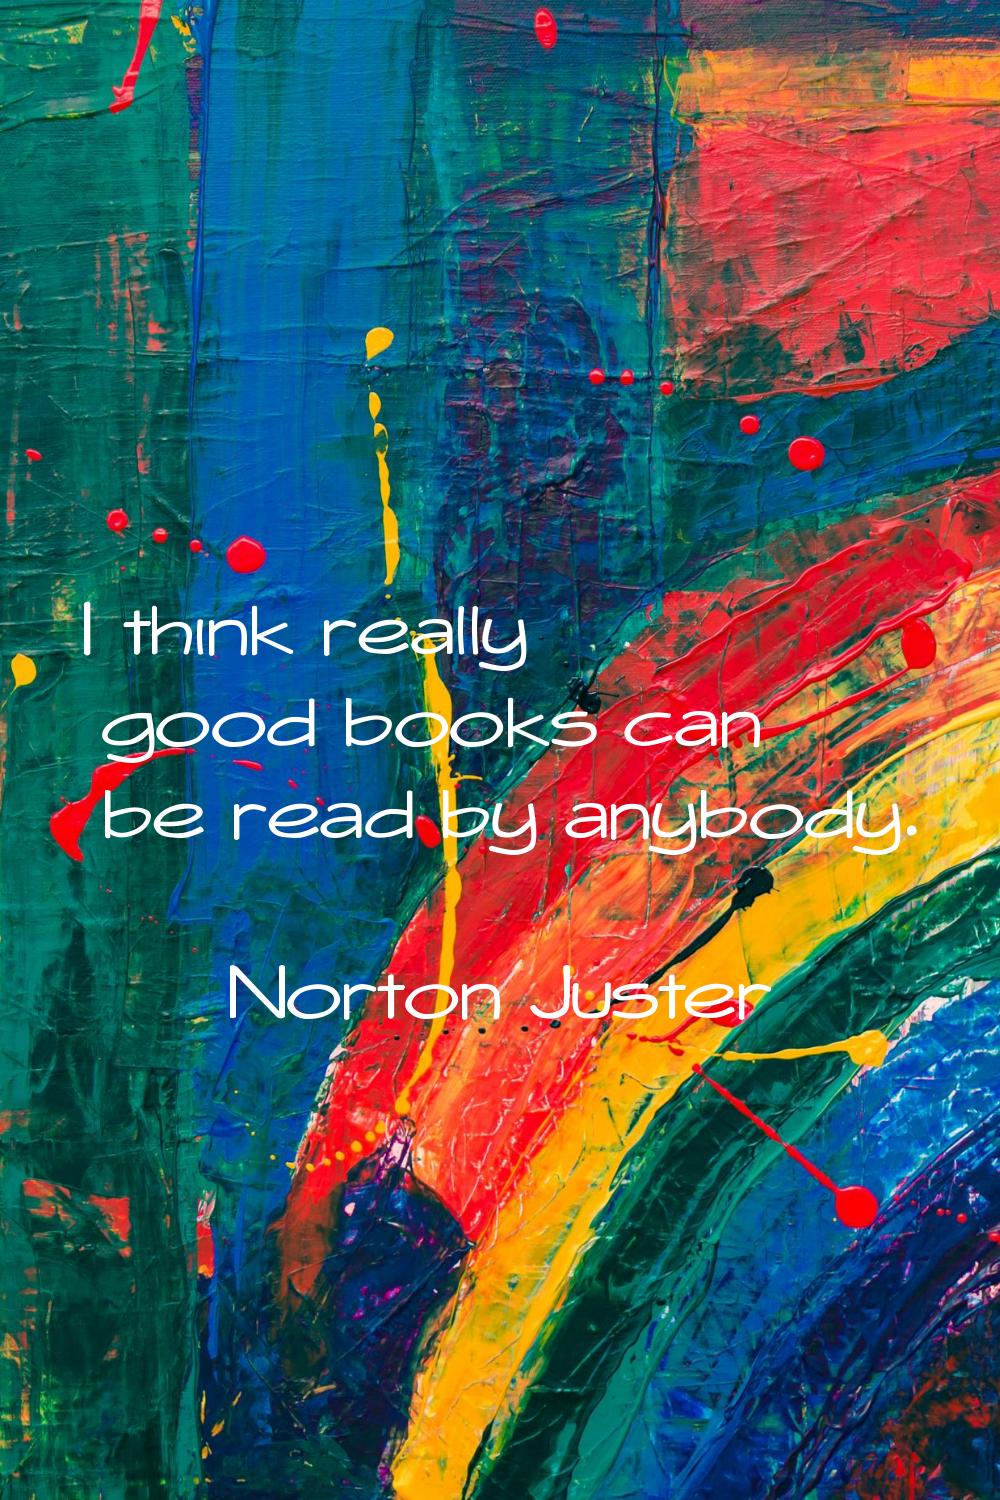 I think really good books can be read by anybody.